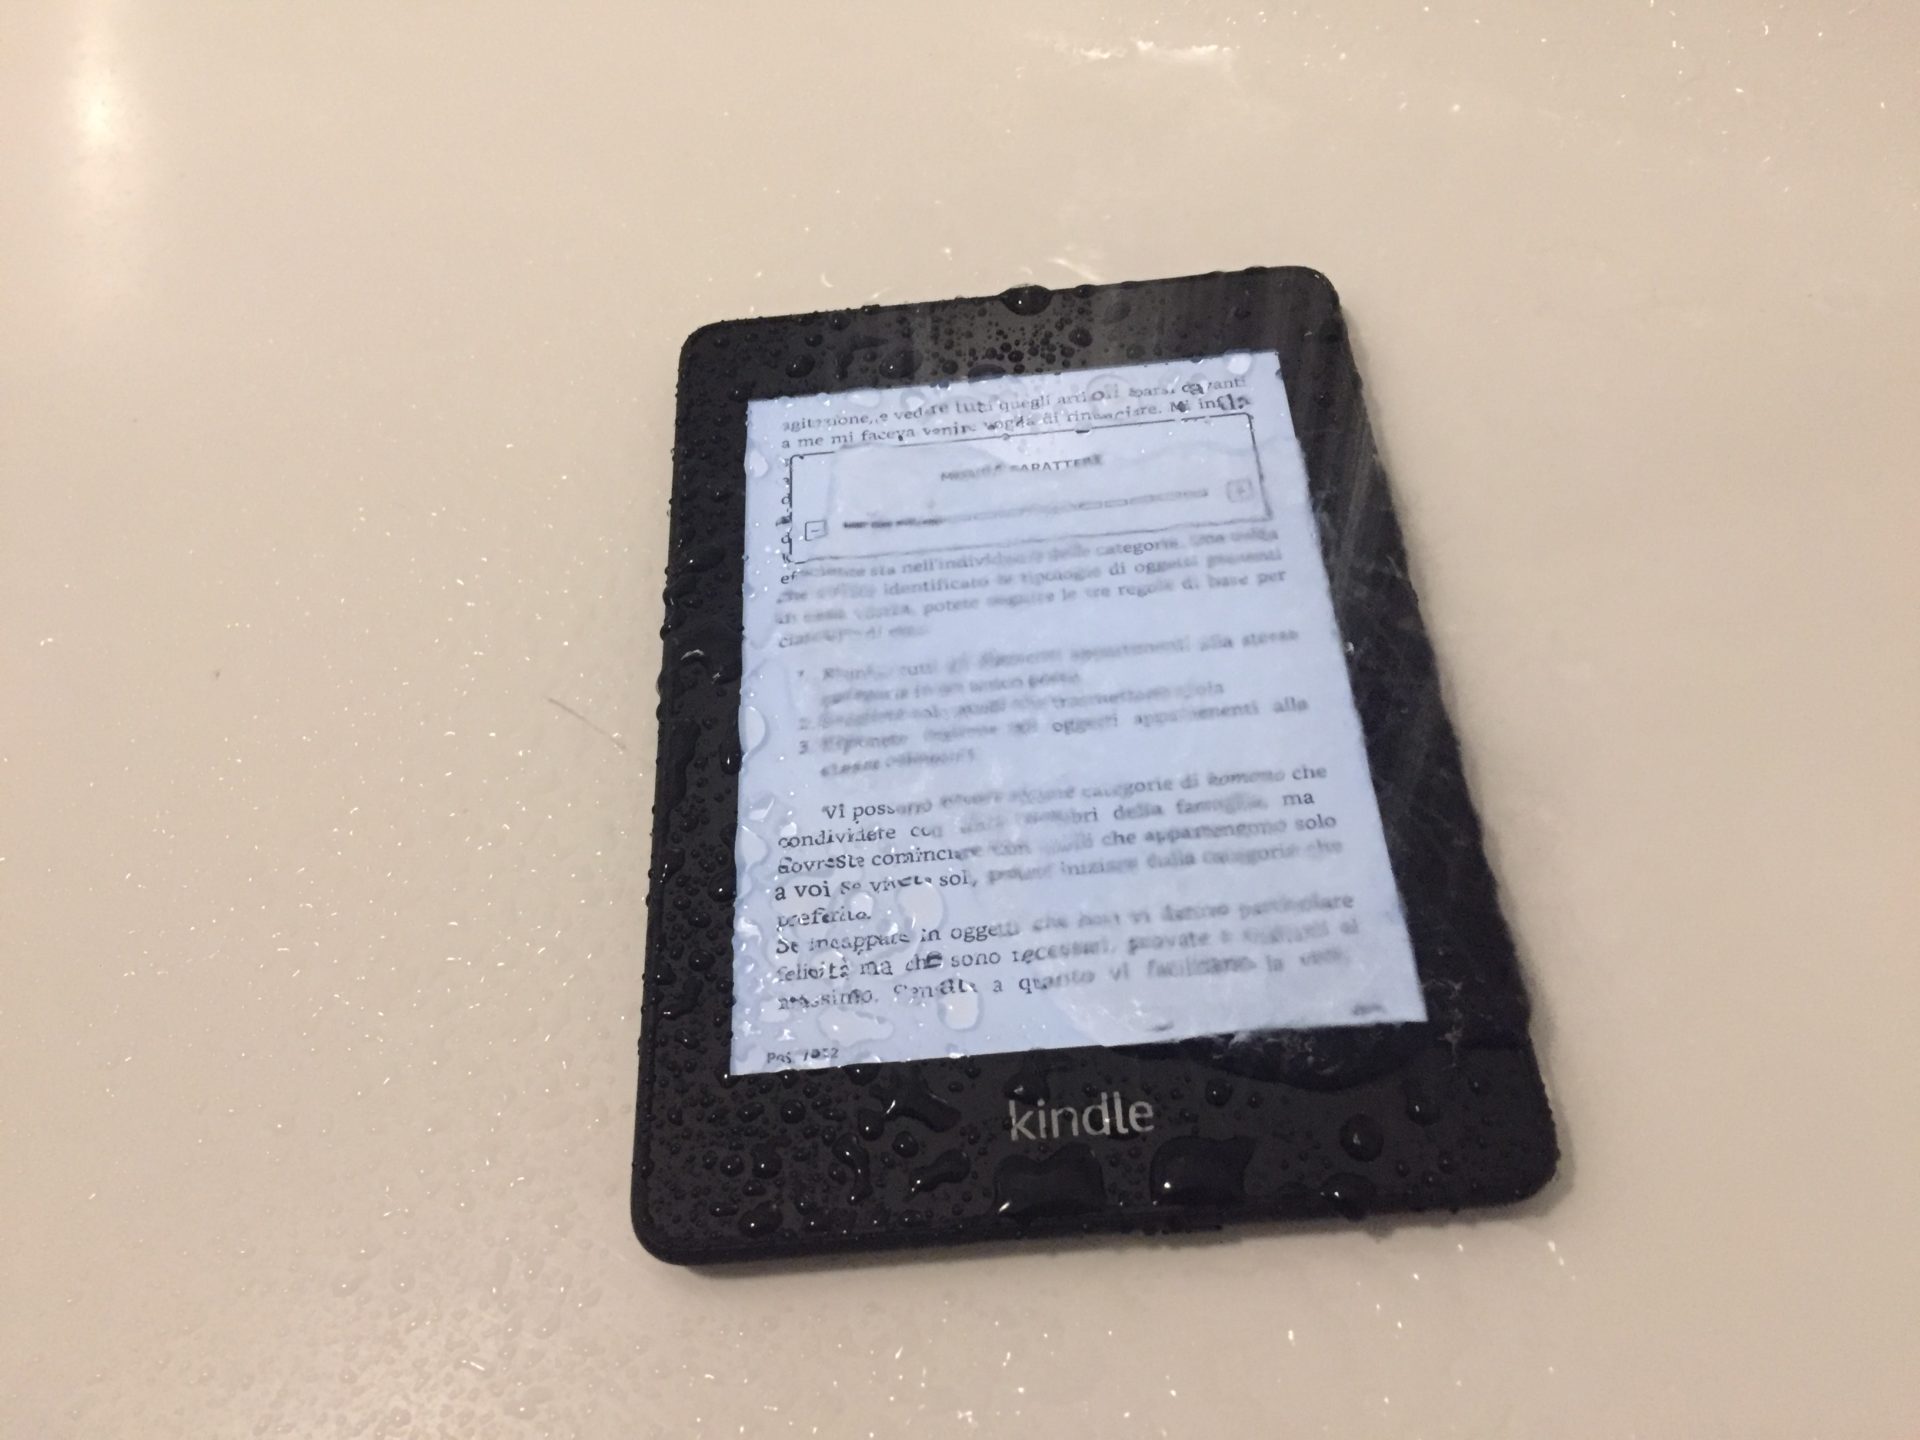 paperwhite kindle versions